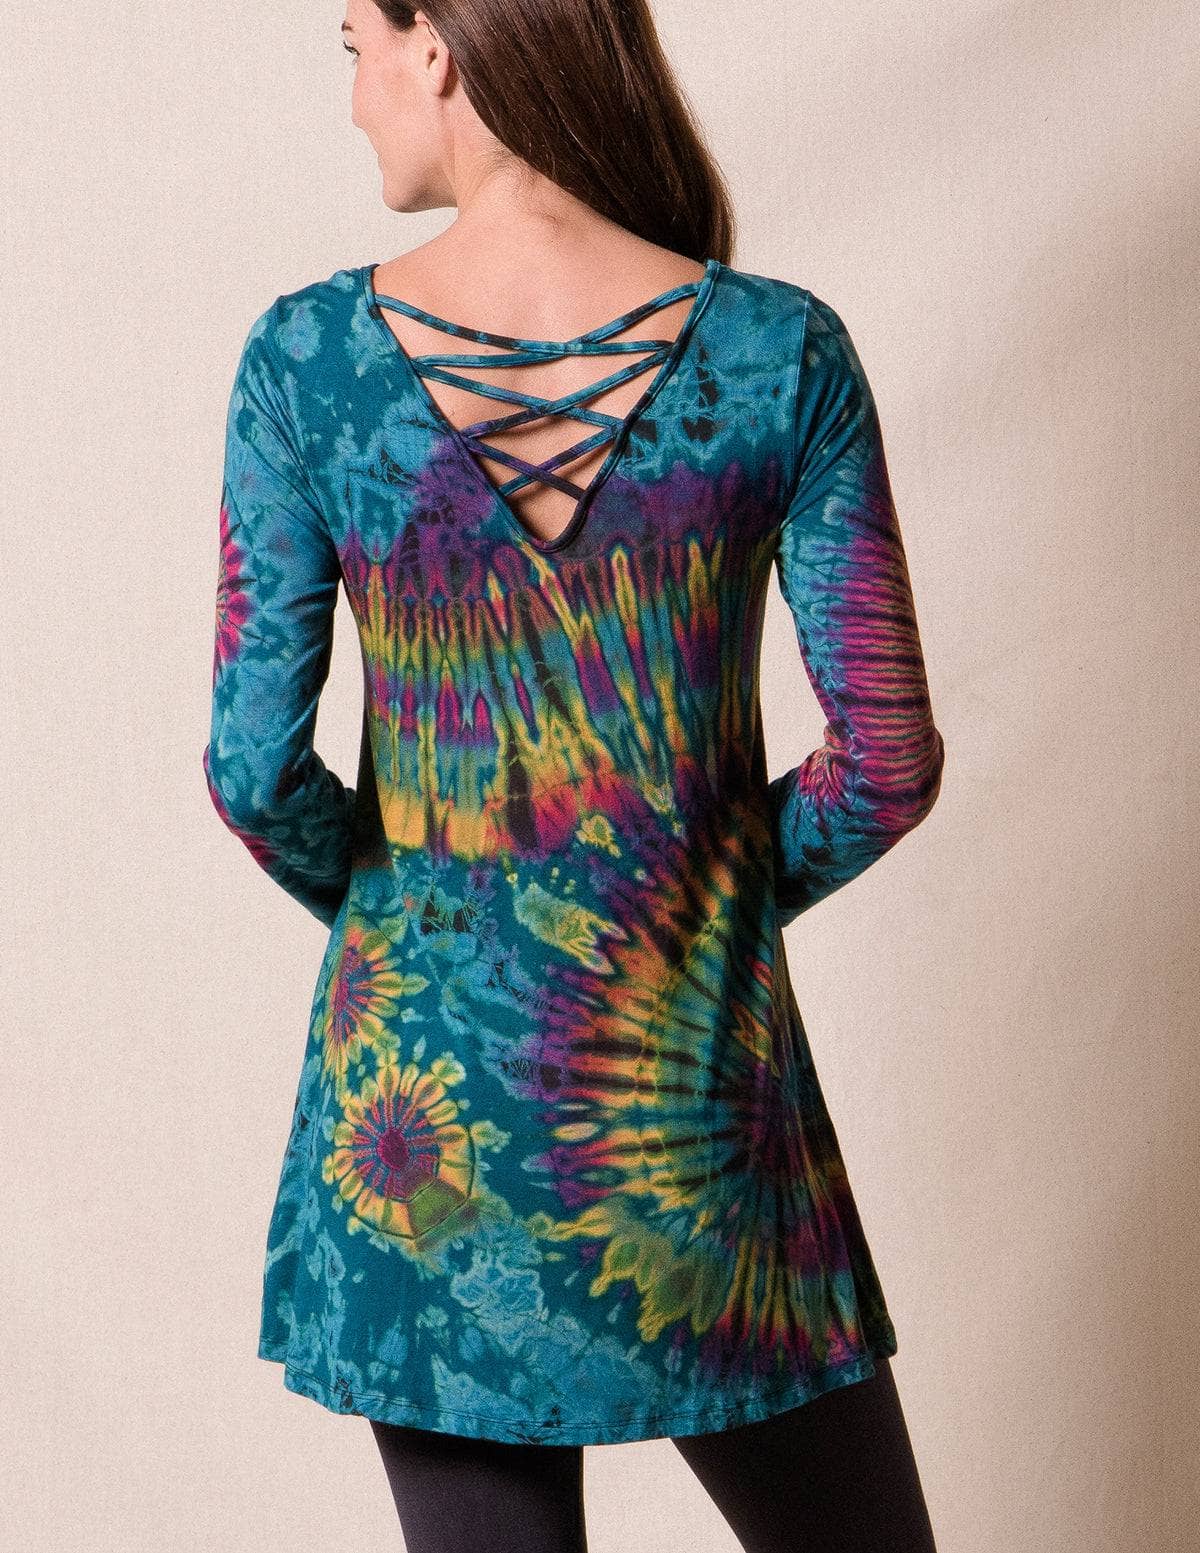 Tie Dye Long Sleeve Tops for Women Shirts to Wear with Leggings